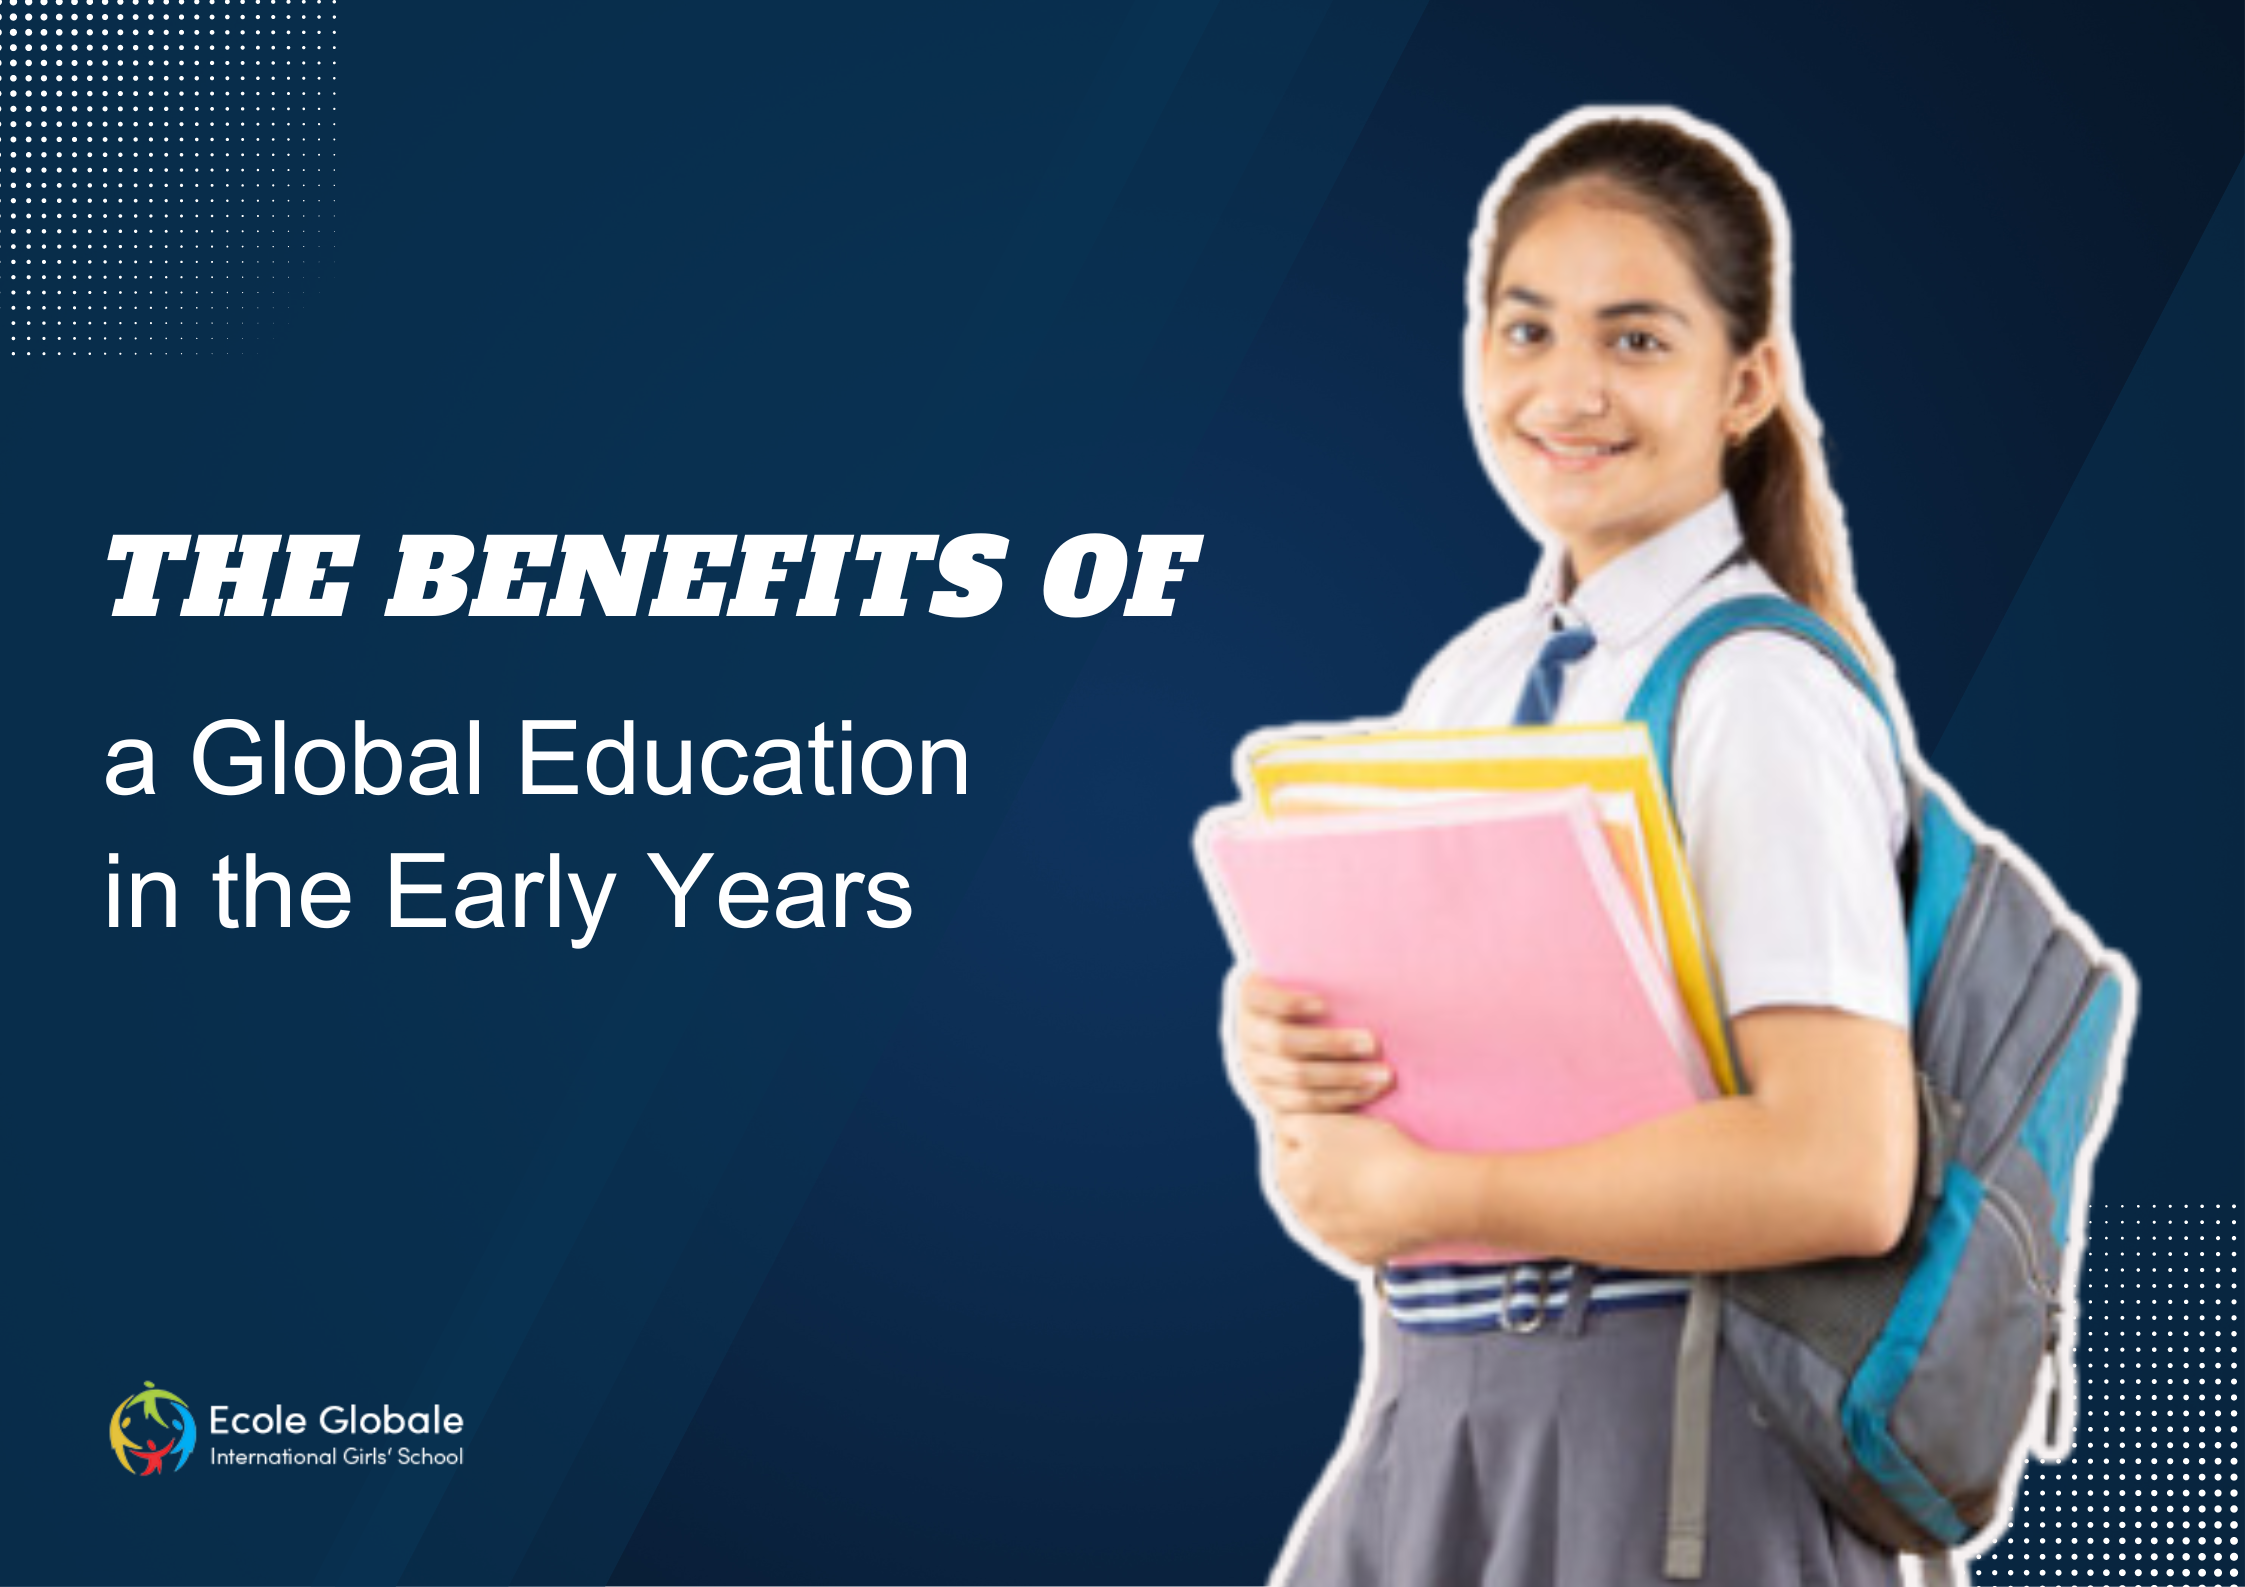 You are currently viewing The Benefits of a Global Education in the Early Years at Ecole Globale